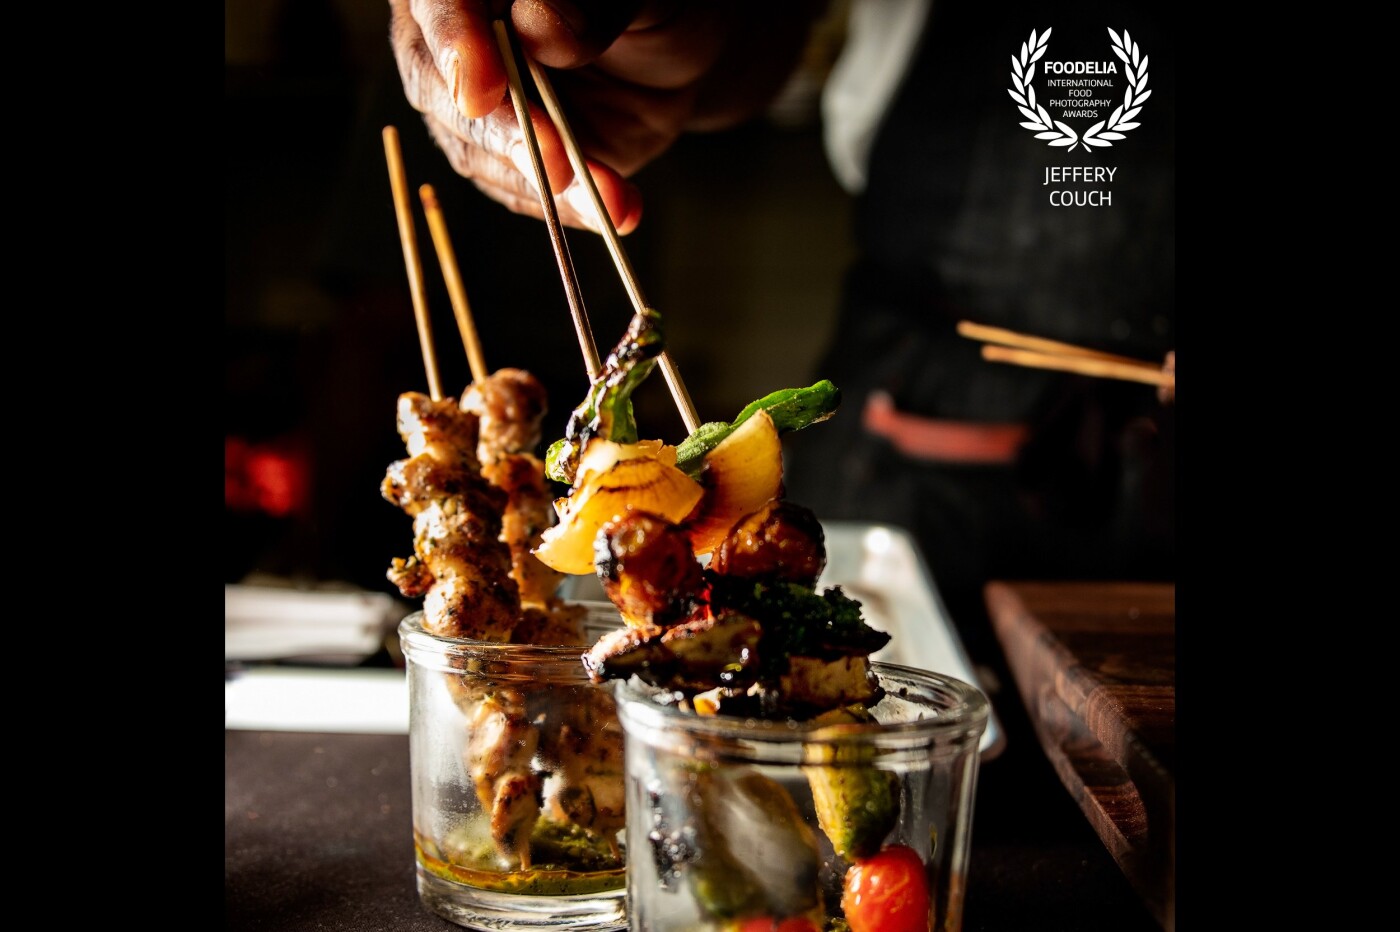 Bites bar menu items from photo shoot at Charcoal Venice a Josiah Citirn restaurant.  Skewers prepared over open charcoal fire .<br />
Prepared by Chef Joe Johnson. Champion Chopped Grill Masters<br />
@charcoalvenice<br />
@chefjoejohnson<br />
@josiahcitrin